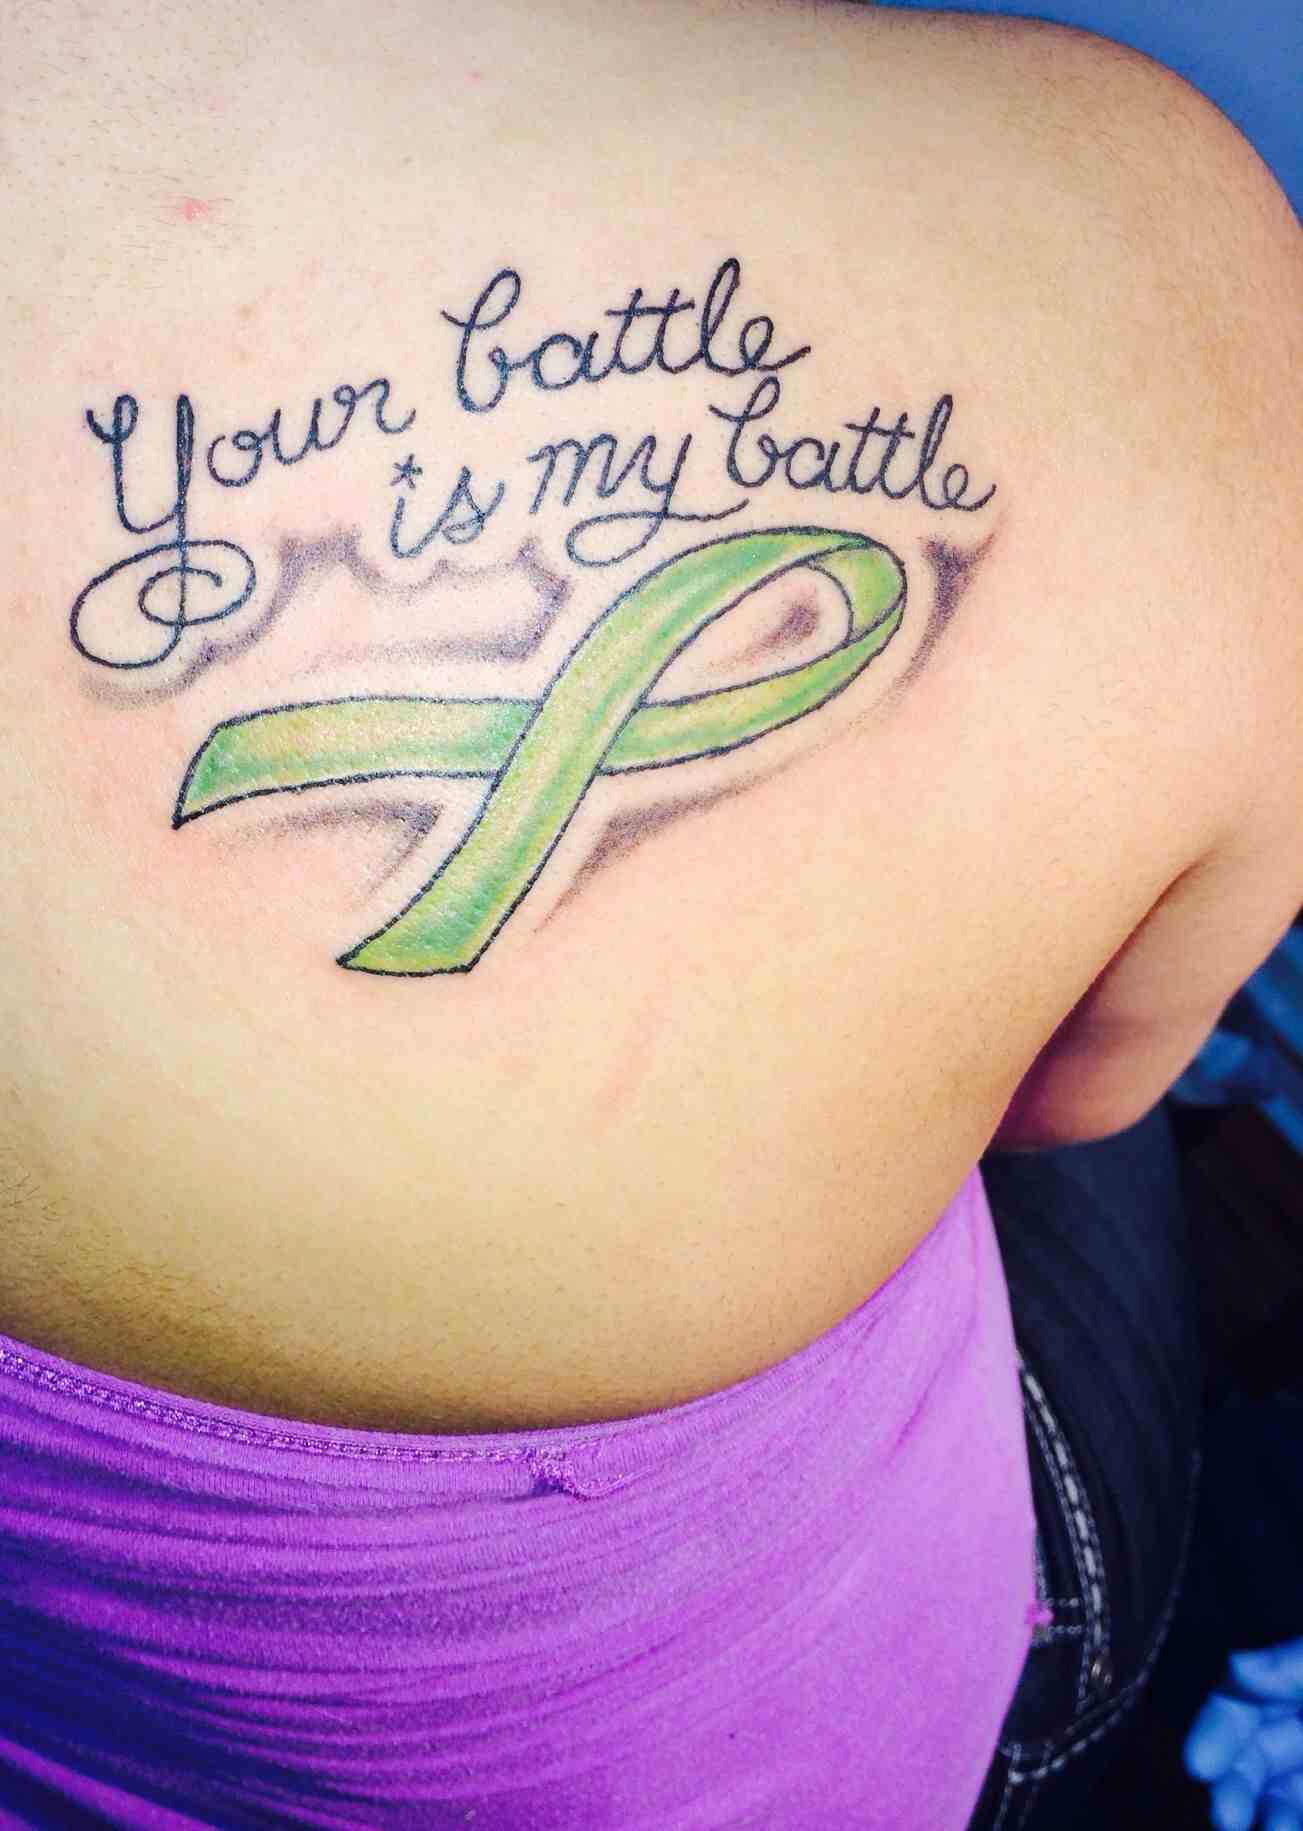 Tattoo Props Inspirational Tattoos For Women From 50 Back Tattoo Ideas